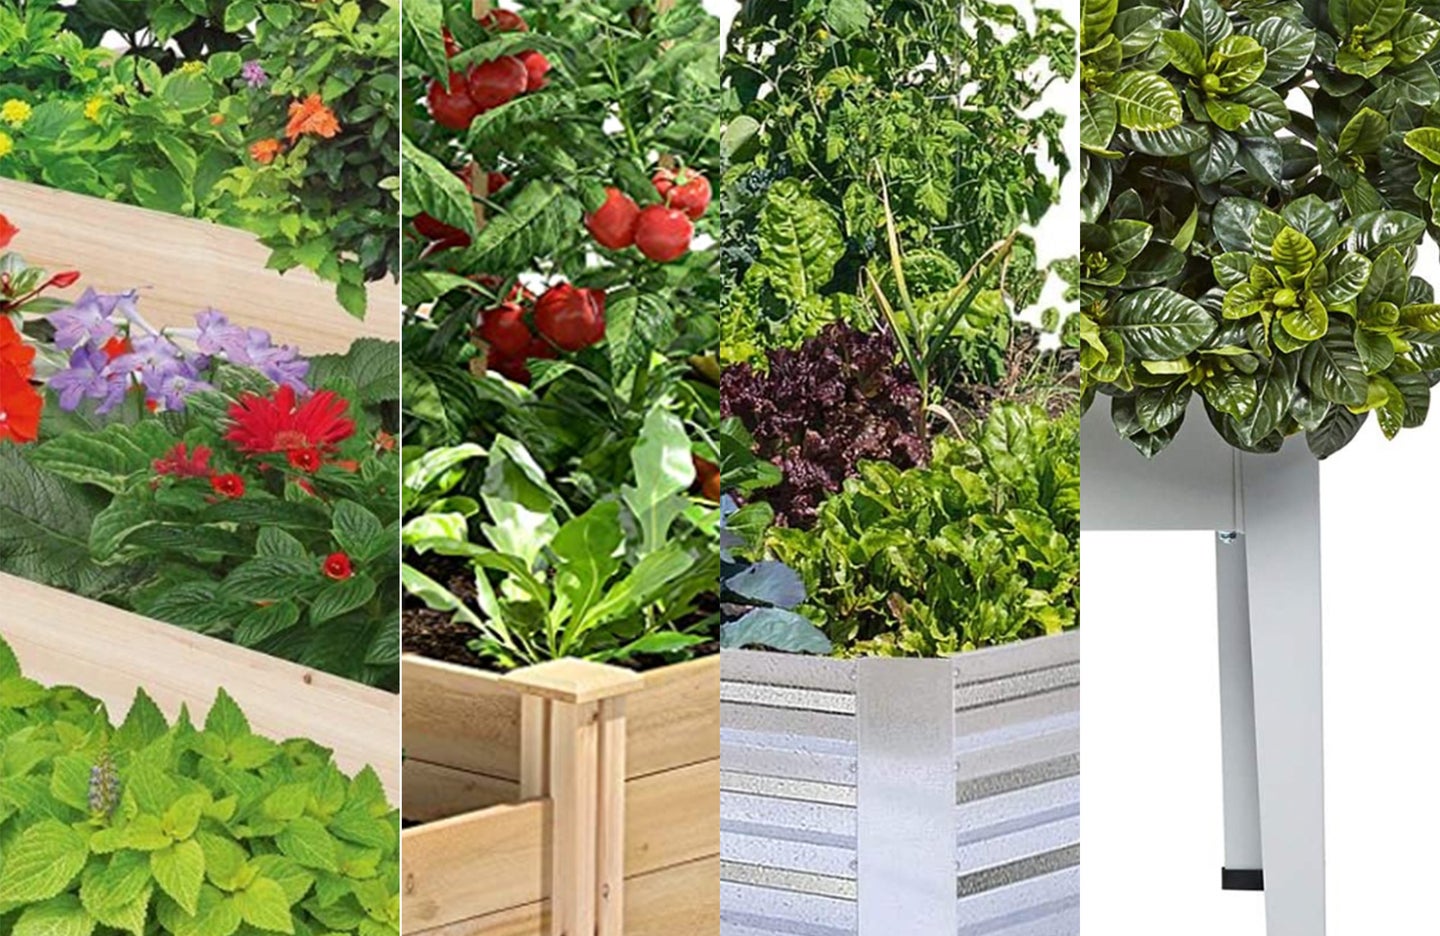 The best raised garden beds will help you start growing whether you have a big backyard or apartment balcony.